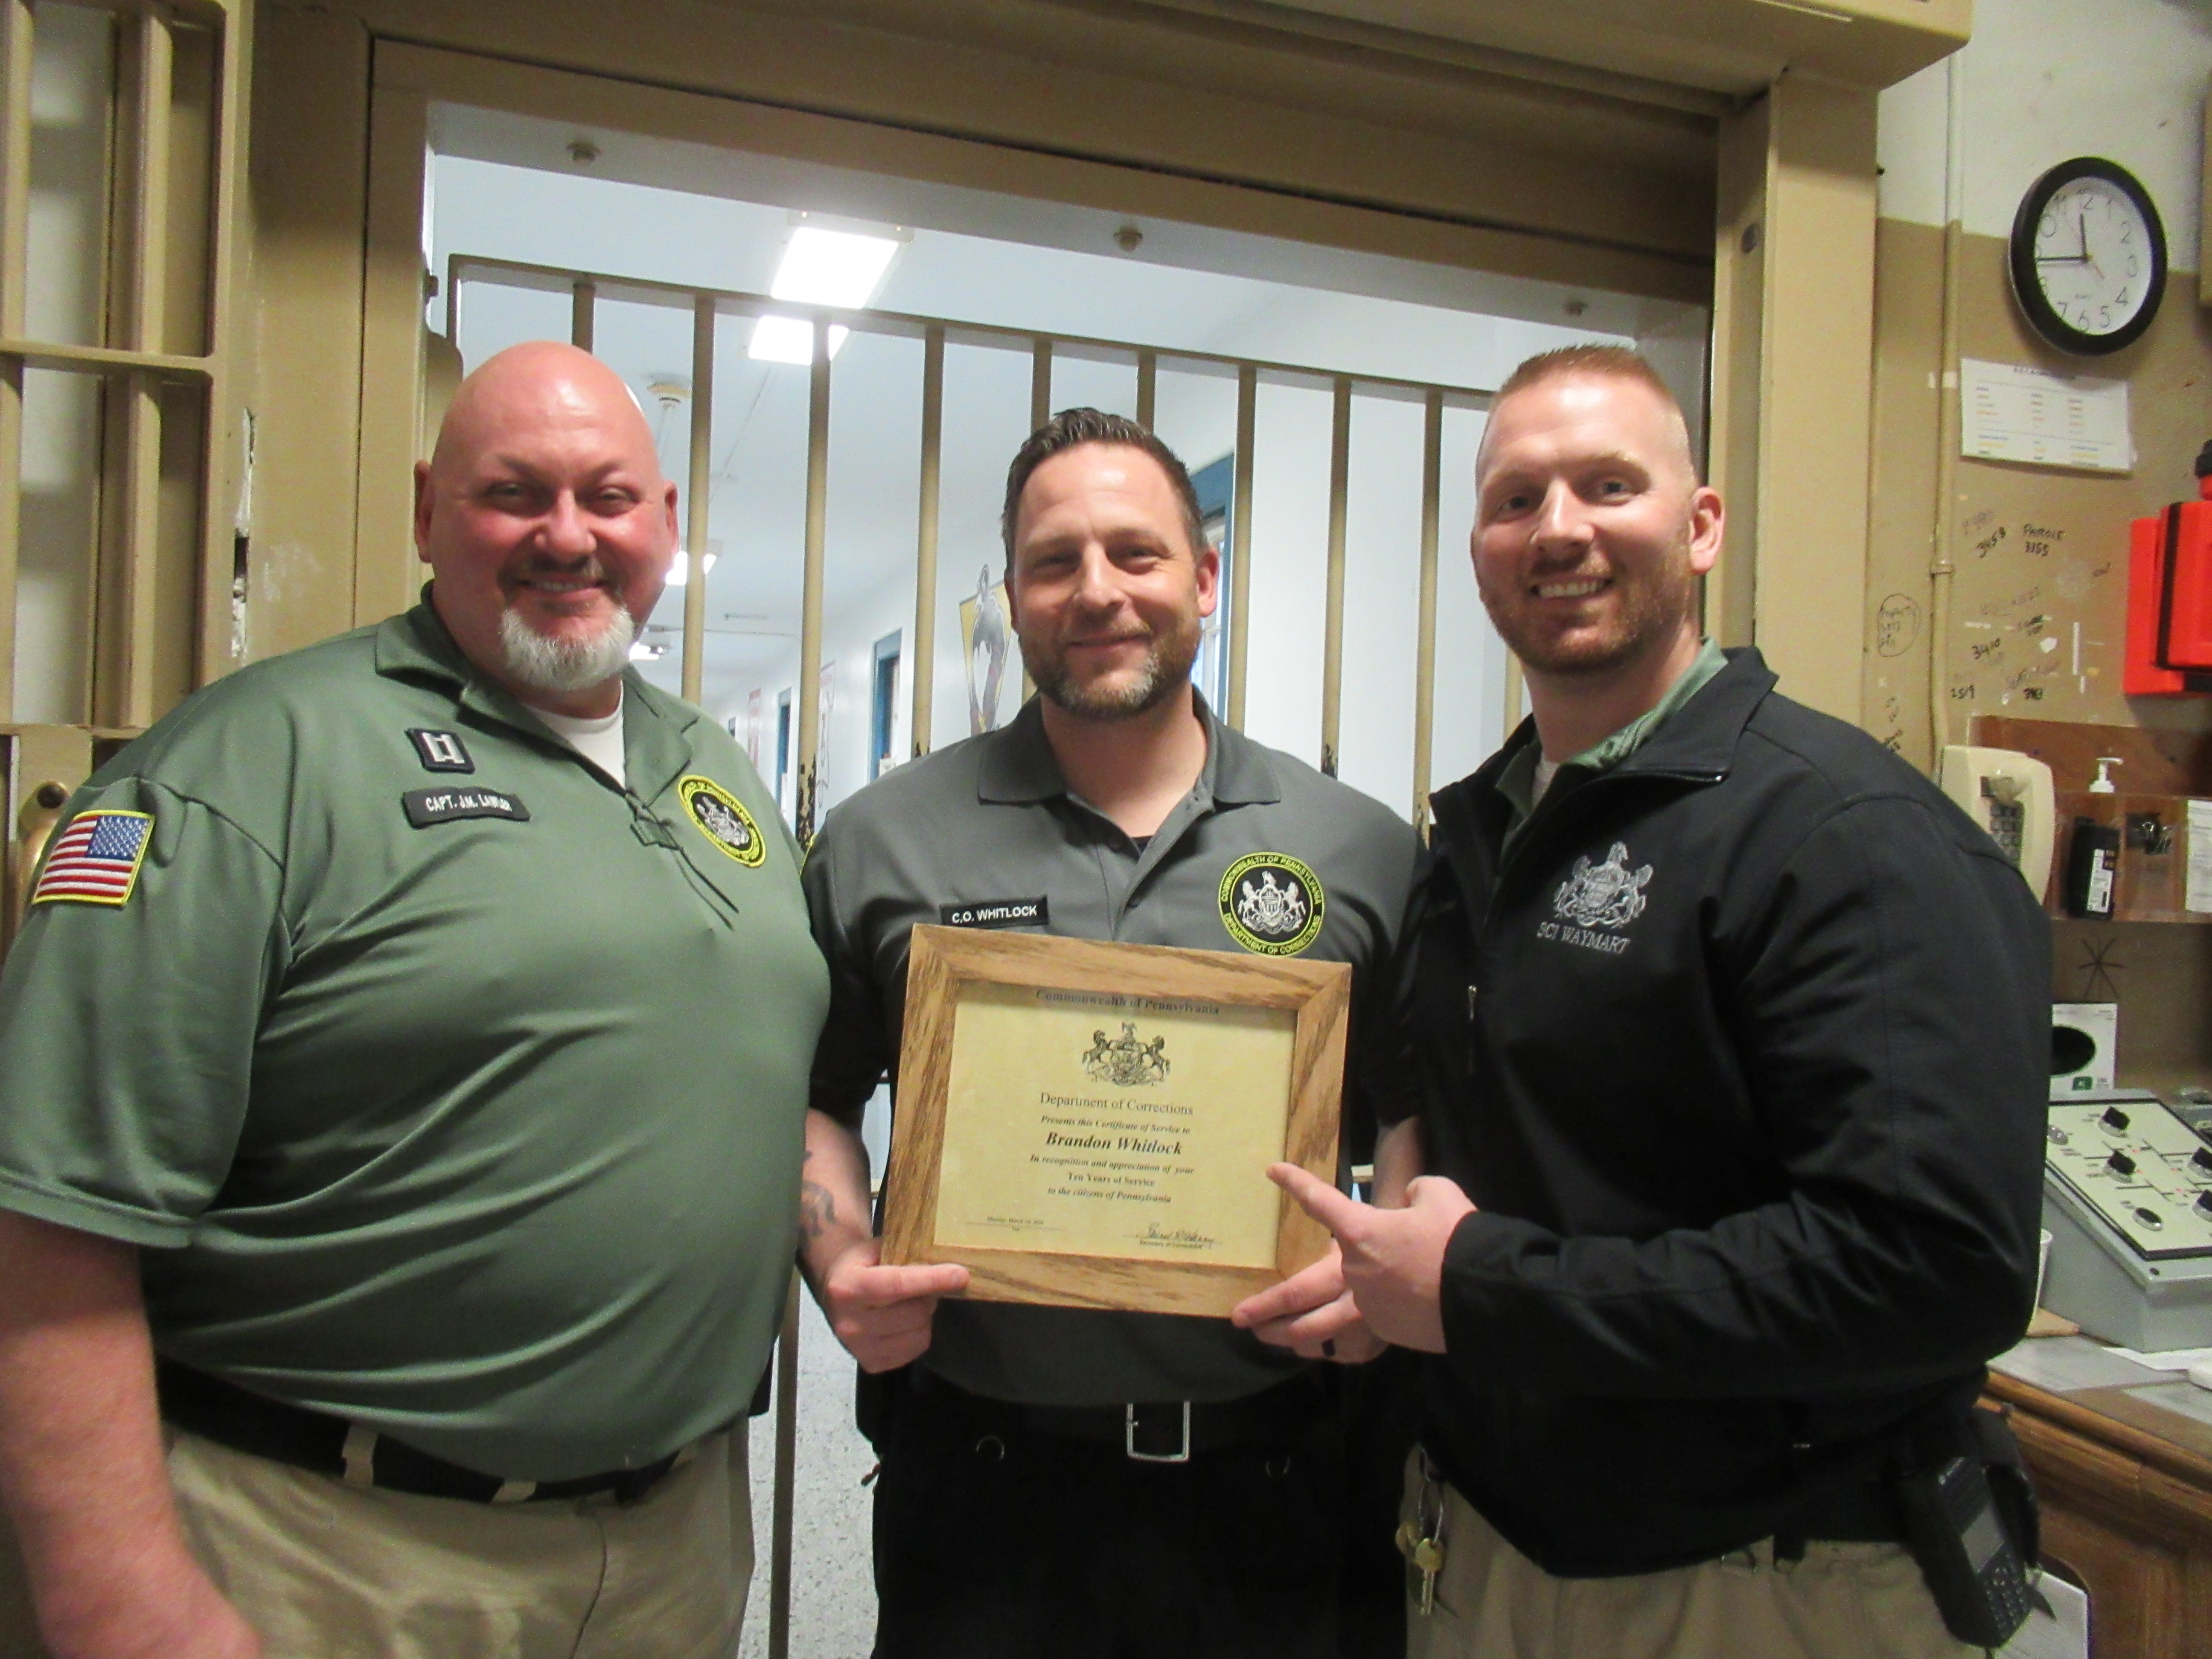 CO Brandon Whitlock holds a certificate while standing with Captain J. Lawler and Lieutenant R. Gardner